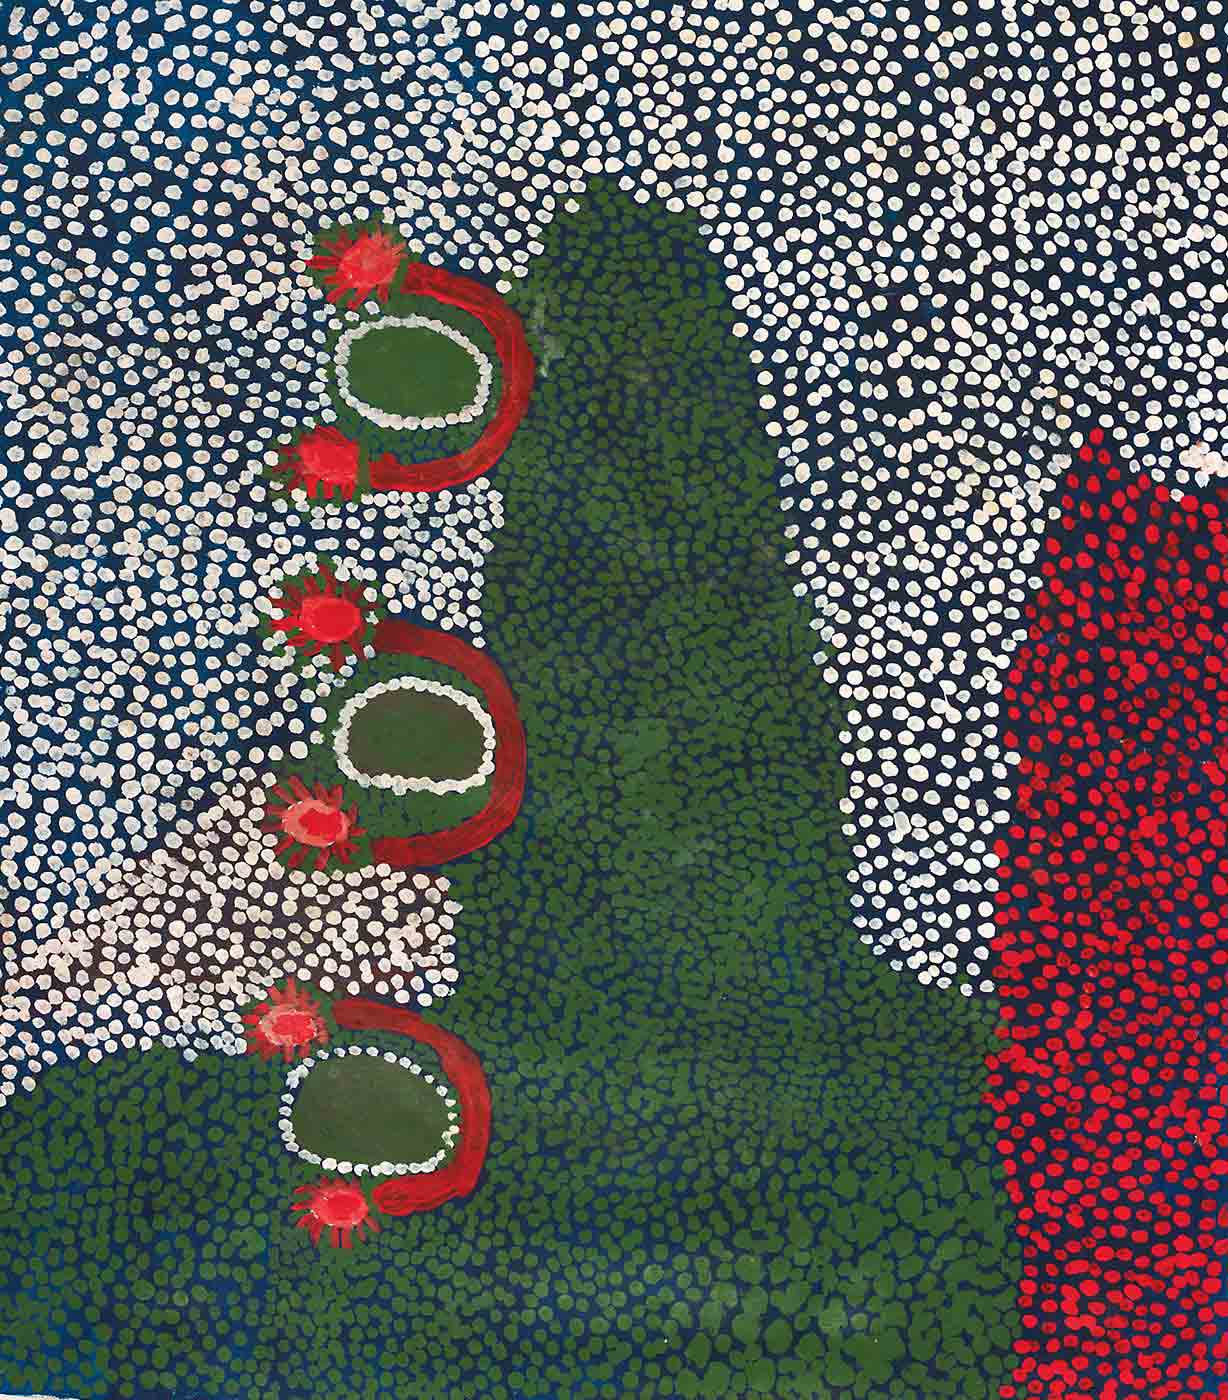 A dot painting made with acrylic paint on canvas. The painting has a dark blue background with three central oval shapes in green. Around each of these green oval shapes is an outline of white dots. Around that outline is a red semi circle with sun shapes at either end. Dots fill the rest of the painting. One side has white dots and the other side has a section of green dots and a smaller section of red dots in the corner. The different coloured dots meet in the centre creating a wavy line. - click to view larger image